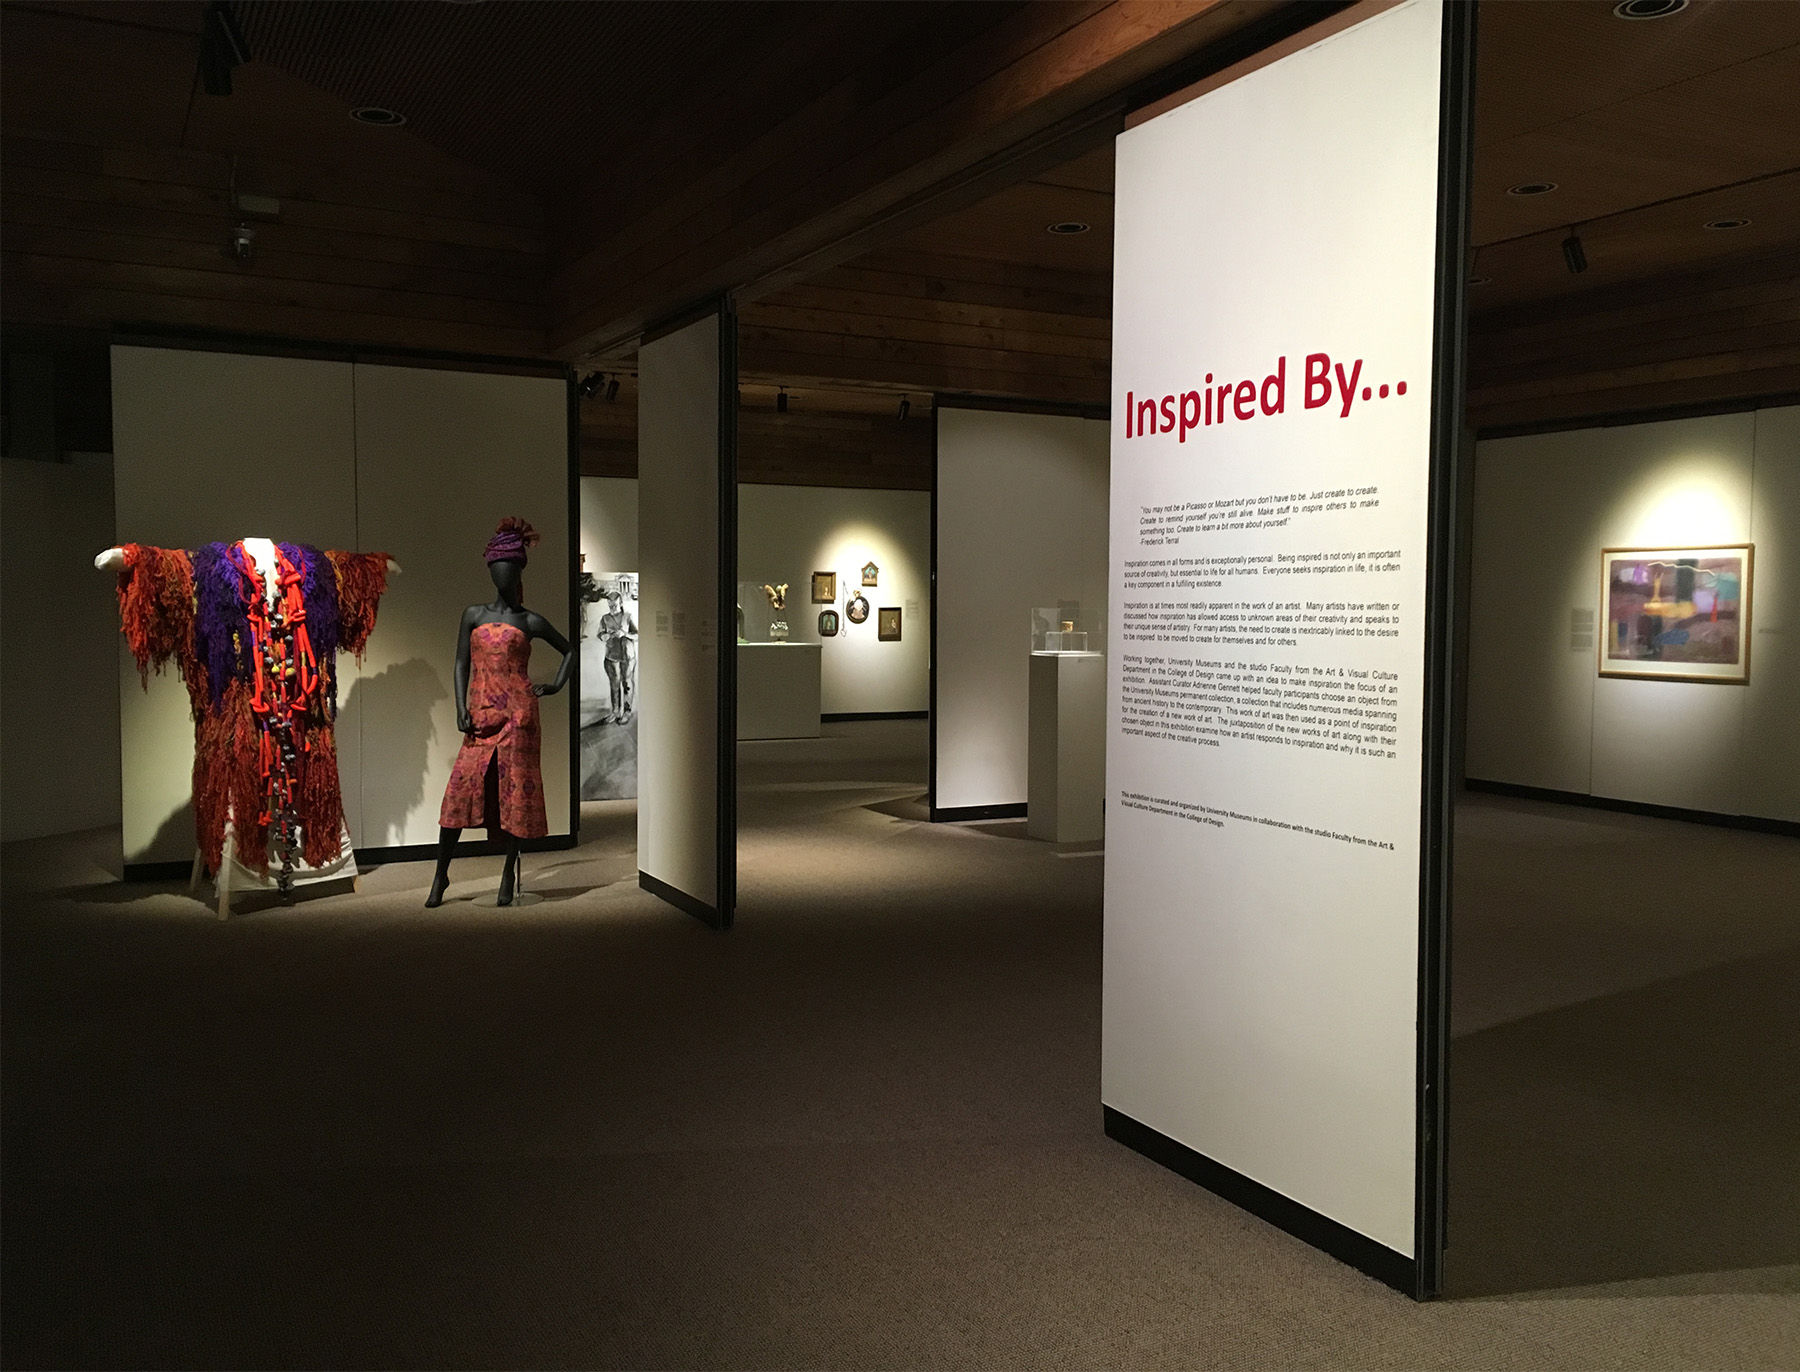 A "happy hour" event from 5 to 6:30 p.m. Friday, Sept. 2, will open the "Inspired By..." exhibition at the Brunnier Art Museum. All photos by Nancy Gebhart.